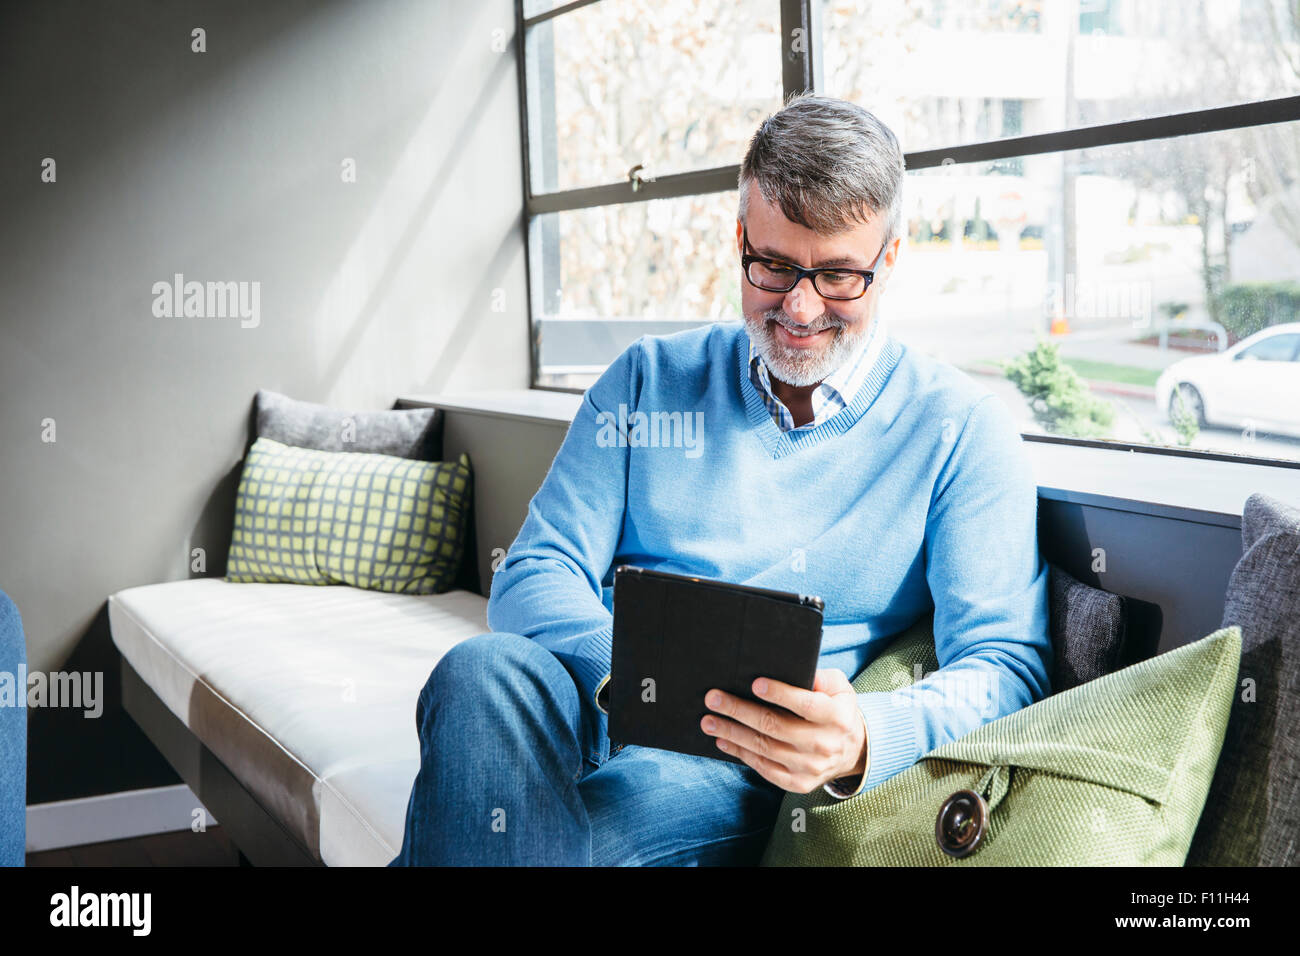 Caucasian businessman using digital tablet in office lobby Banque D'Images